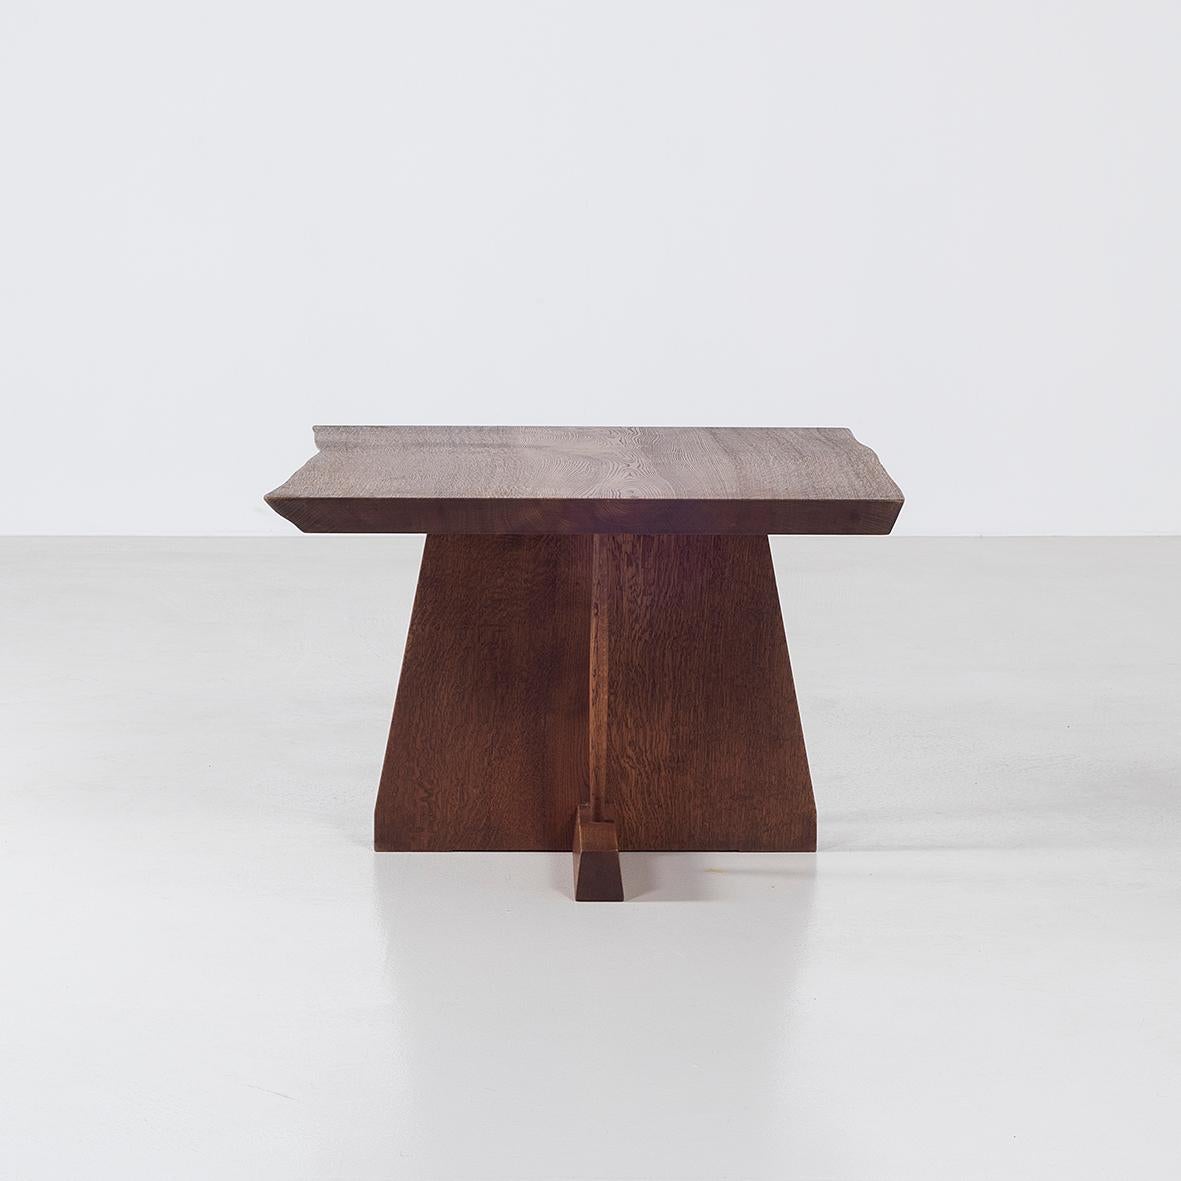 This coffee table is part of the Ippongi Series made by Conde House in Japan.
One can appreciate the irregular shape of the sides of the board, that make it so elegant and unique.

Conde House is a furniture brand that was founded in 1968 in